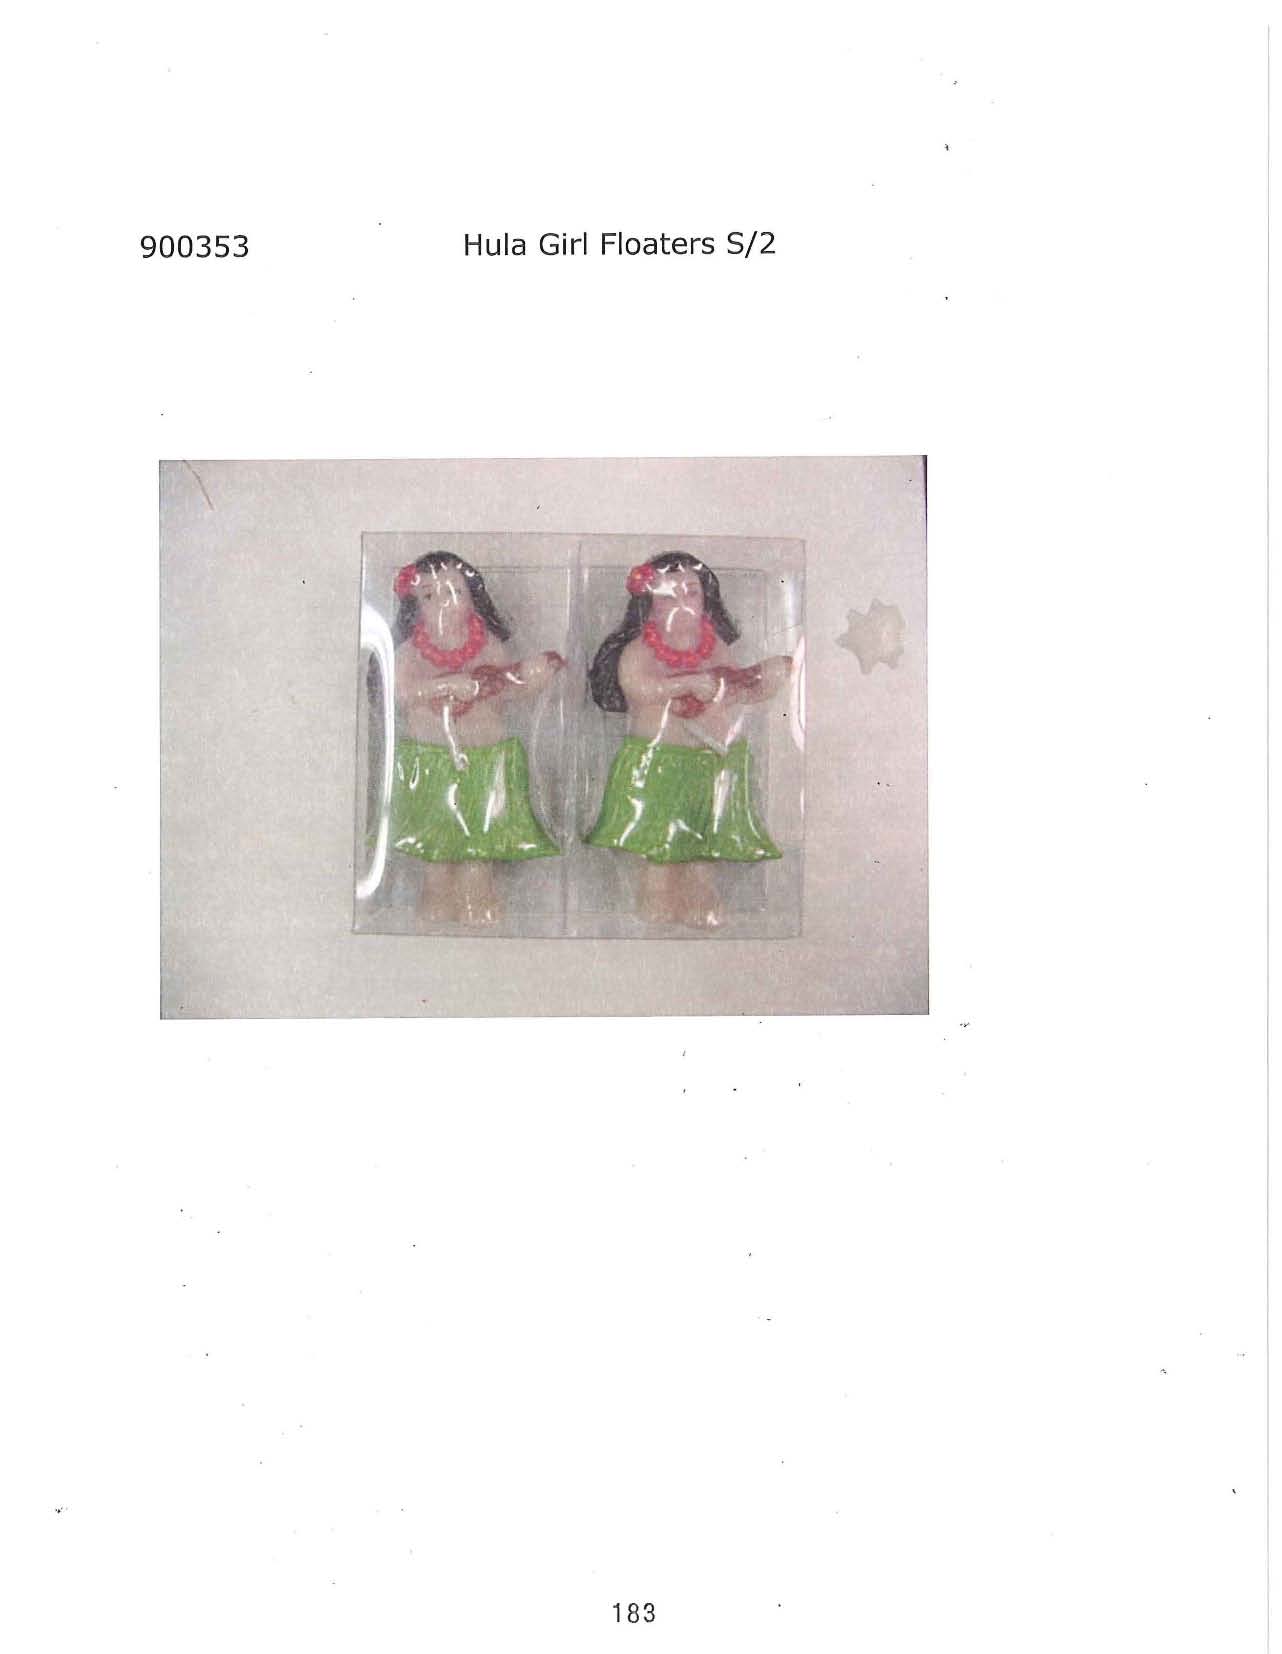 Hula Girl Floating Candles s/2